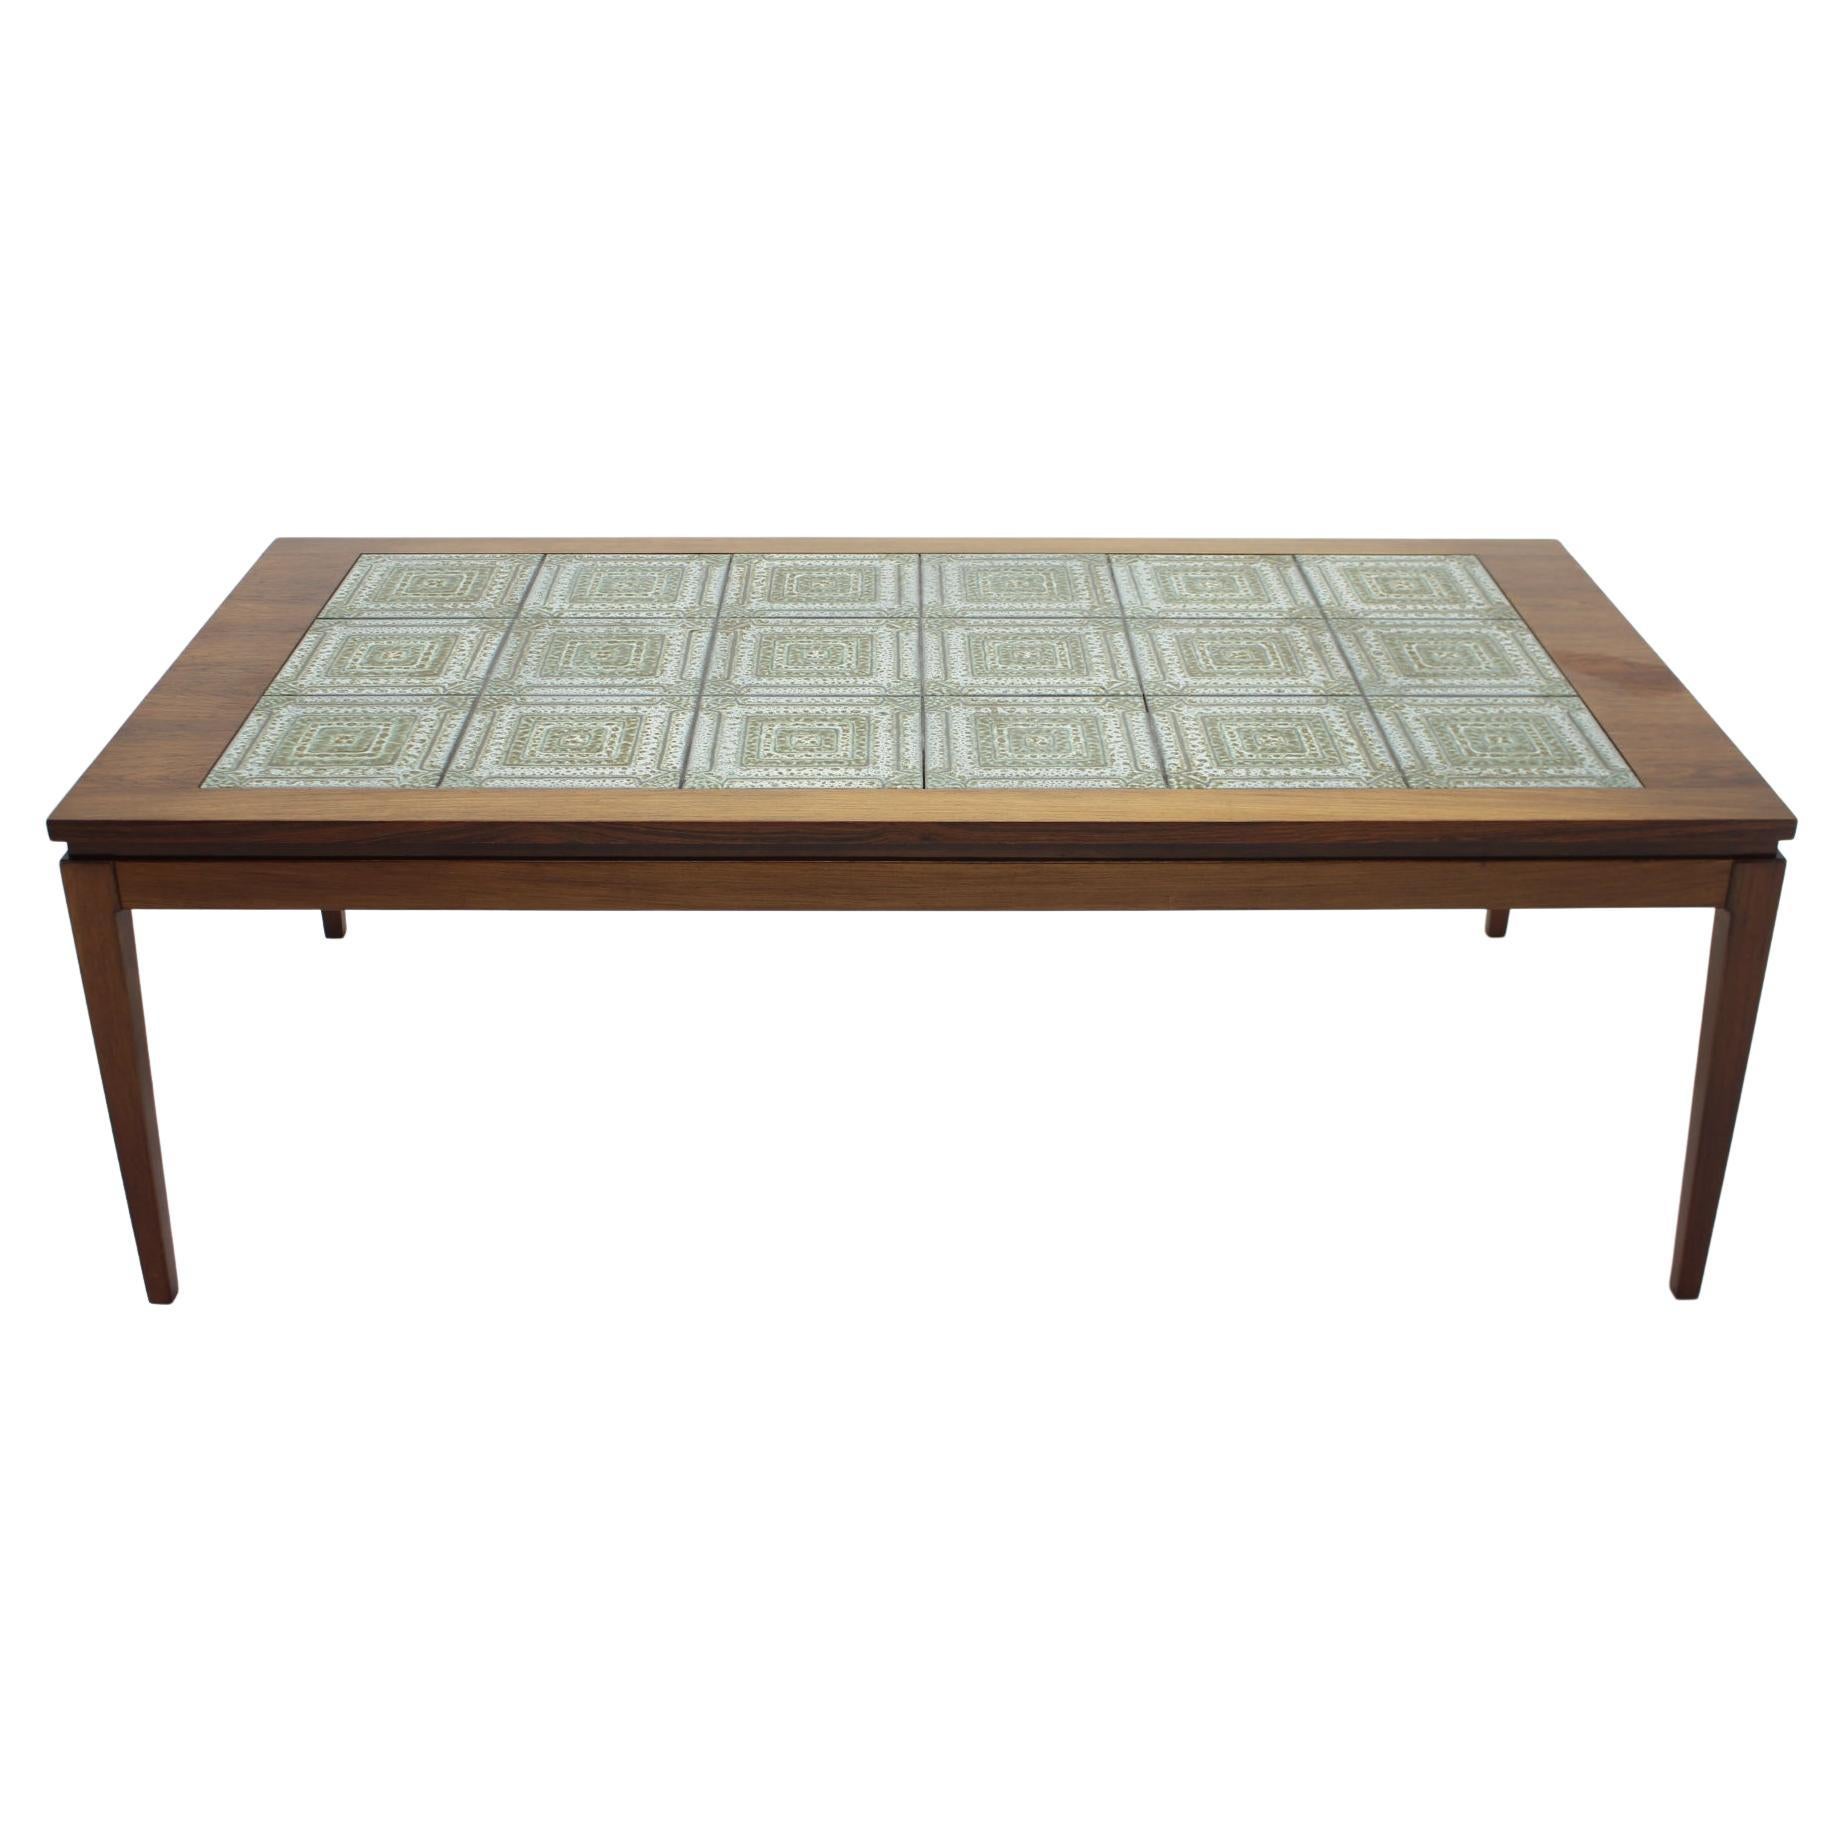 1960s Palisander and Tile Coffee Table, Denmark